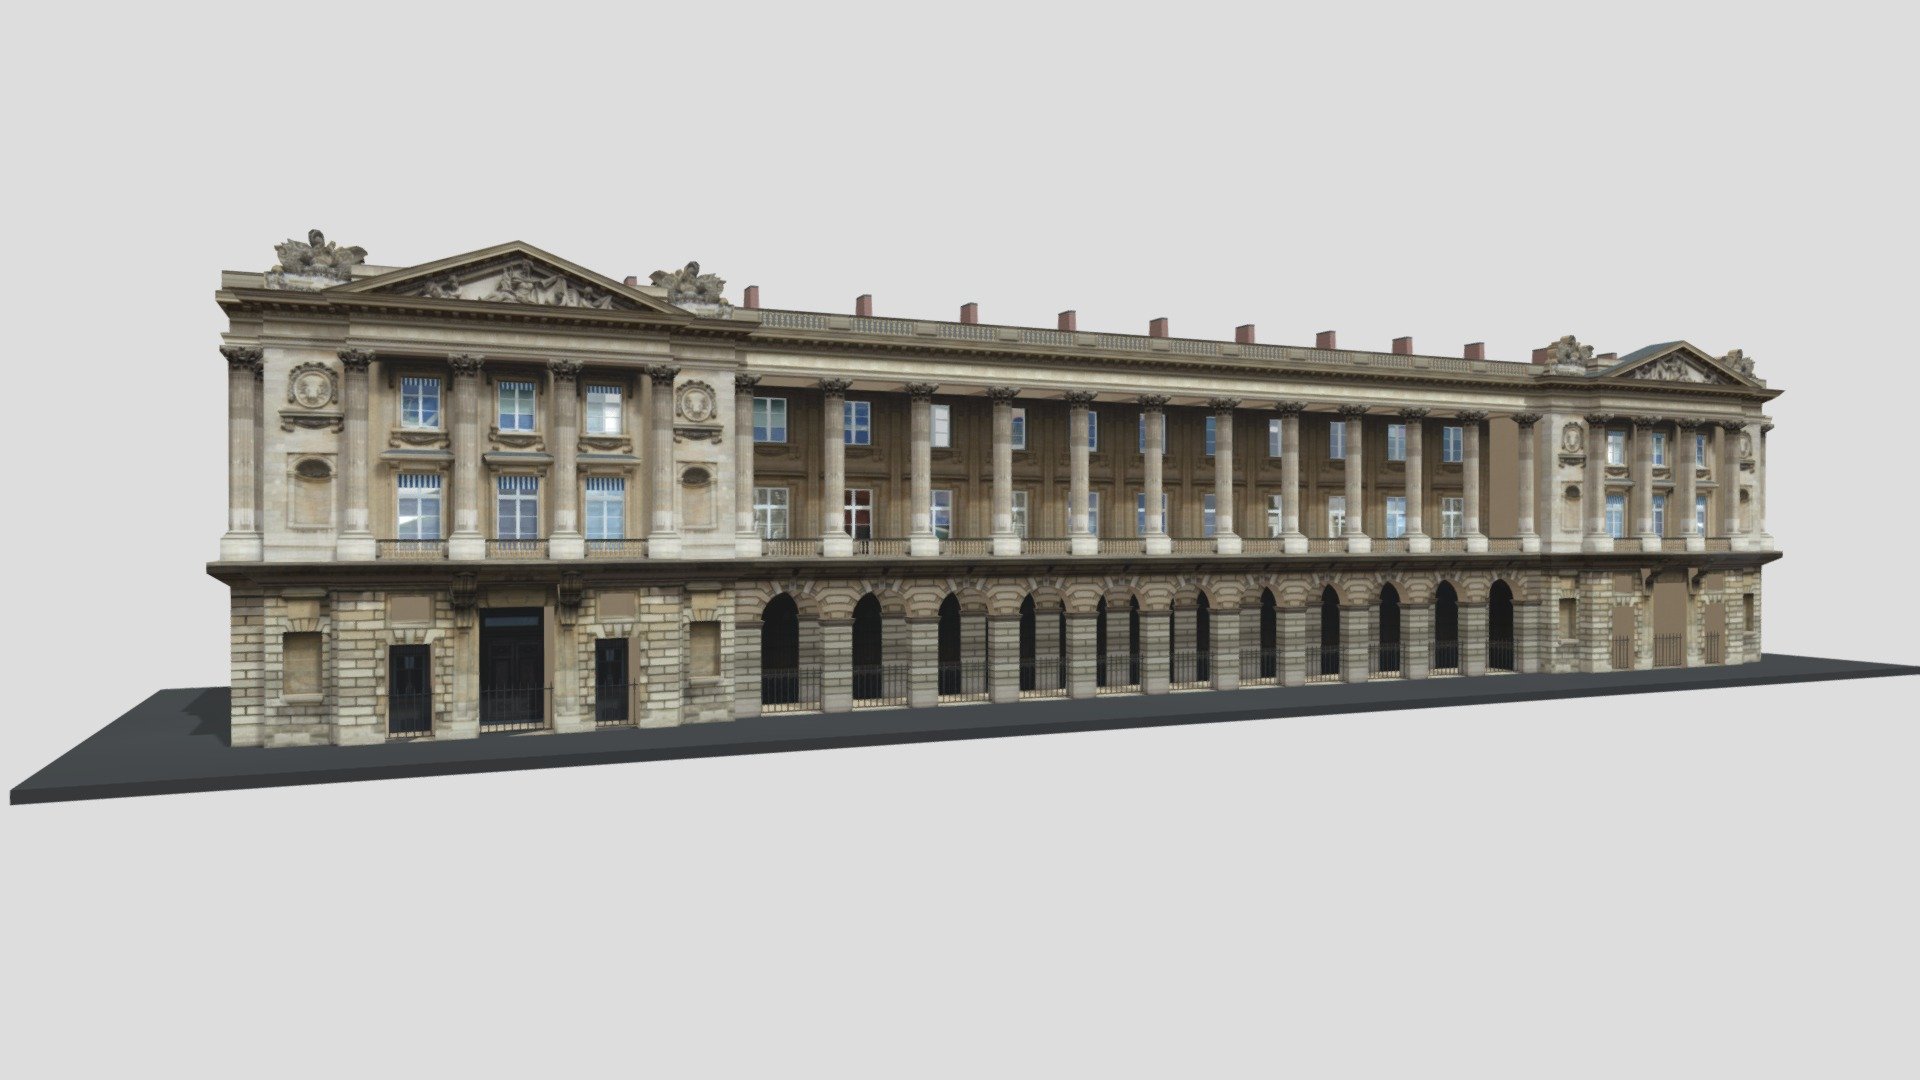 Typical Parisian Apartment Building 36
Originally created with 3ds Max 2015 and rendered in V-Ray 3.0. 

Total Poly Counts:
Poly Count = 83935
Vertex Count = 91412

https://nuralam3d.blogspot.com/2021/09/typical-parisian-apartment-building-36.html - Typical Parisian Apartment Building 36 - 3D model by nuralam018 3d model